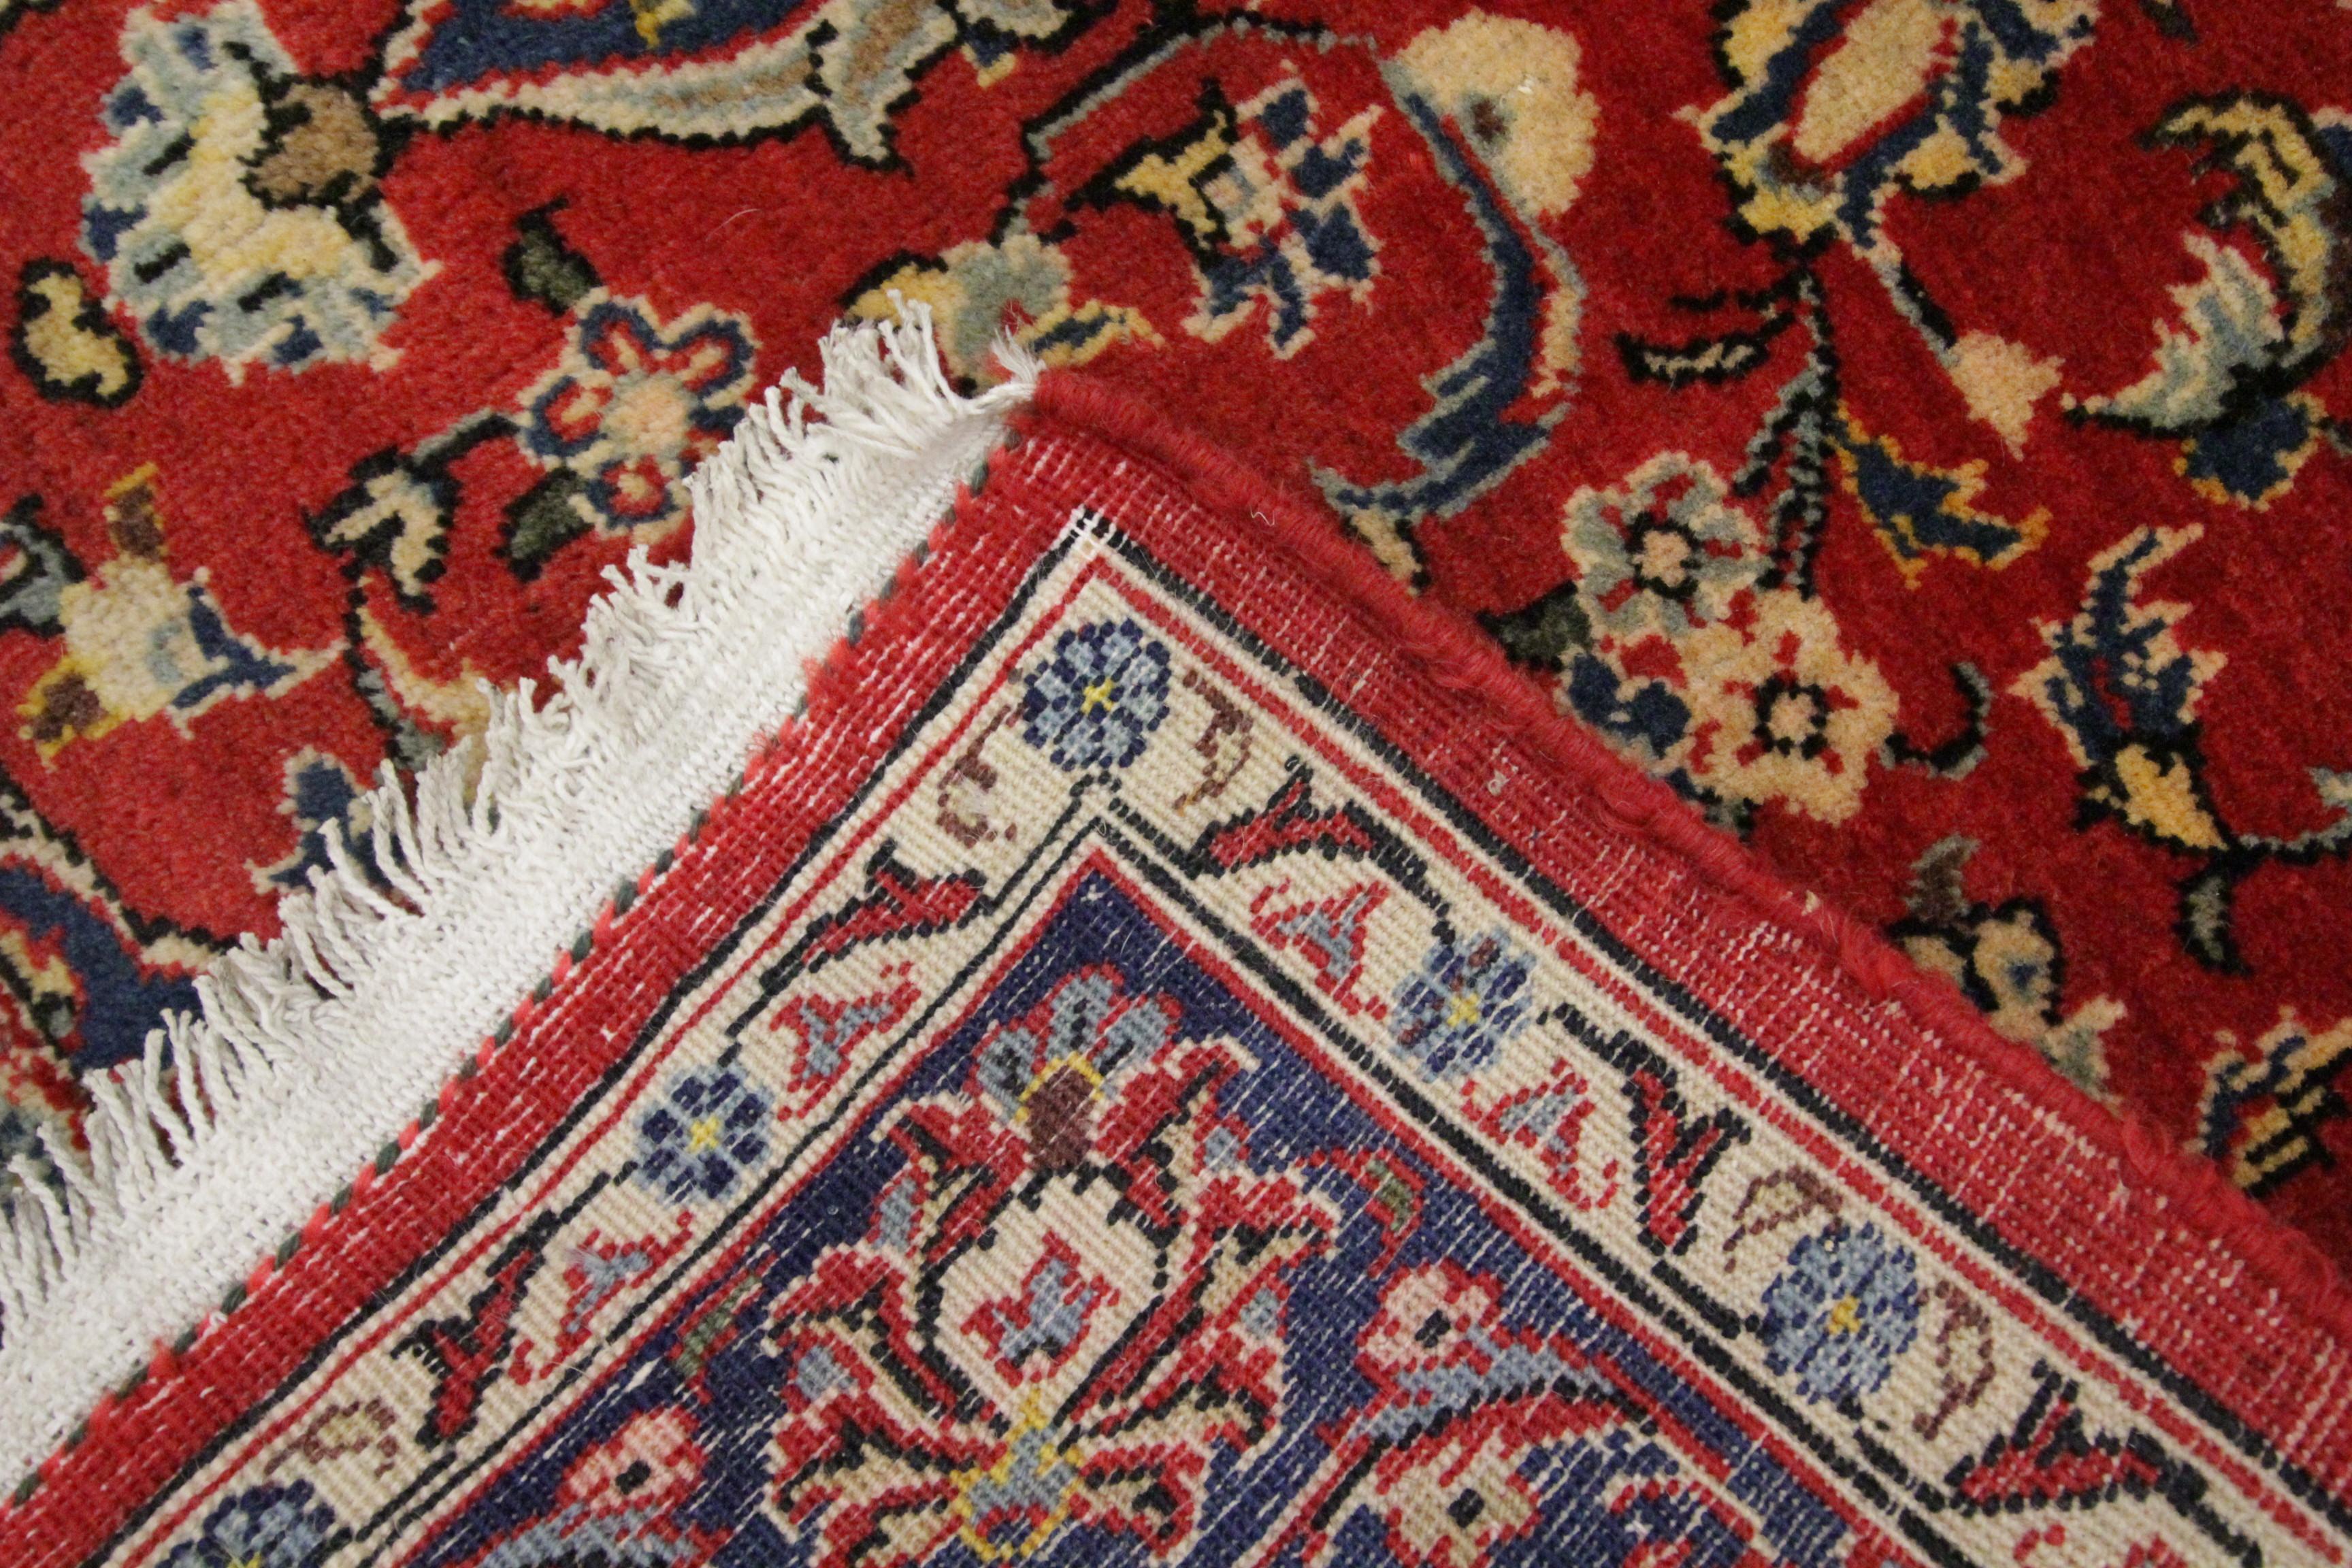 Small Living Area Rug Handwoven Red Oriental Wool Carpet Traditional In Excellent Condition For Sale In Hampshire, GB